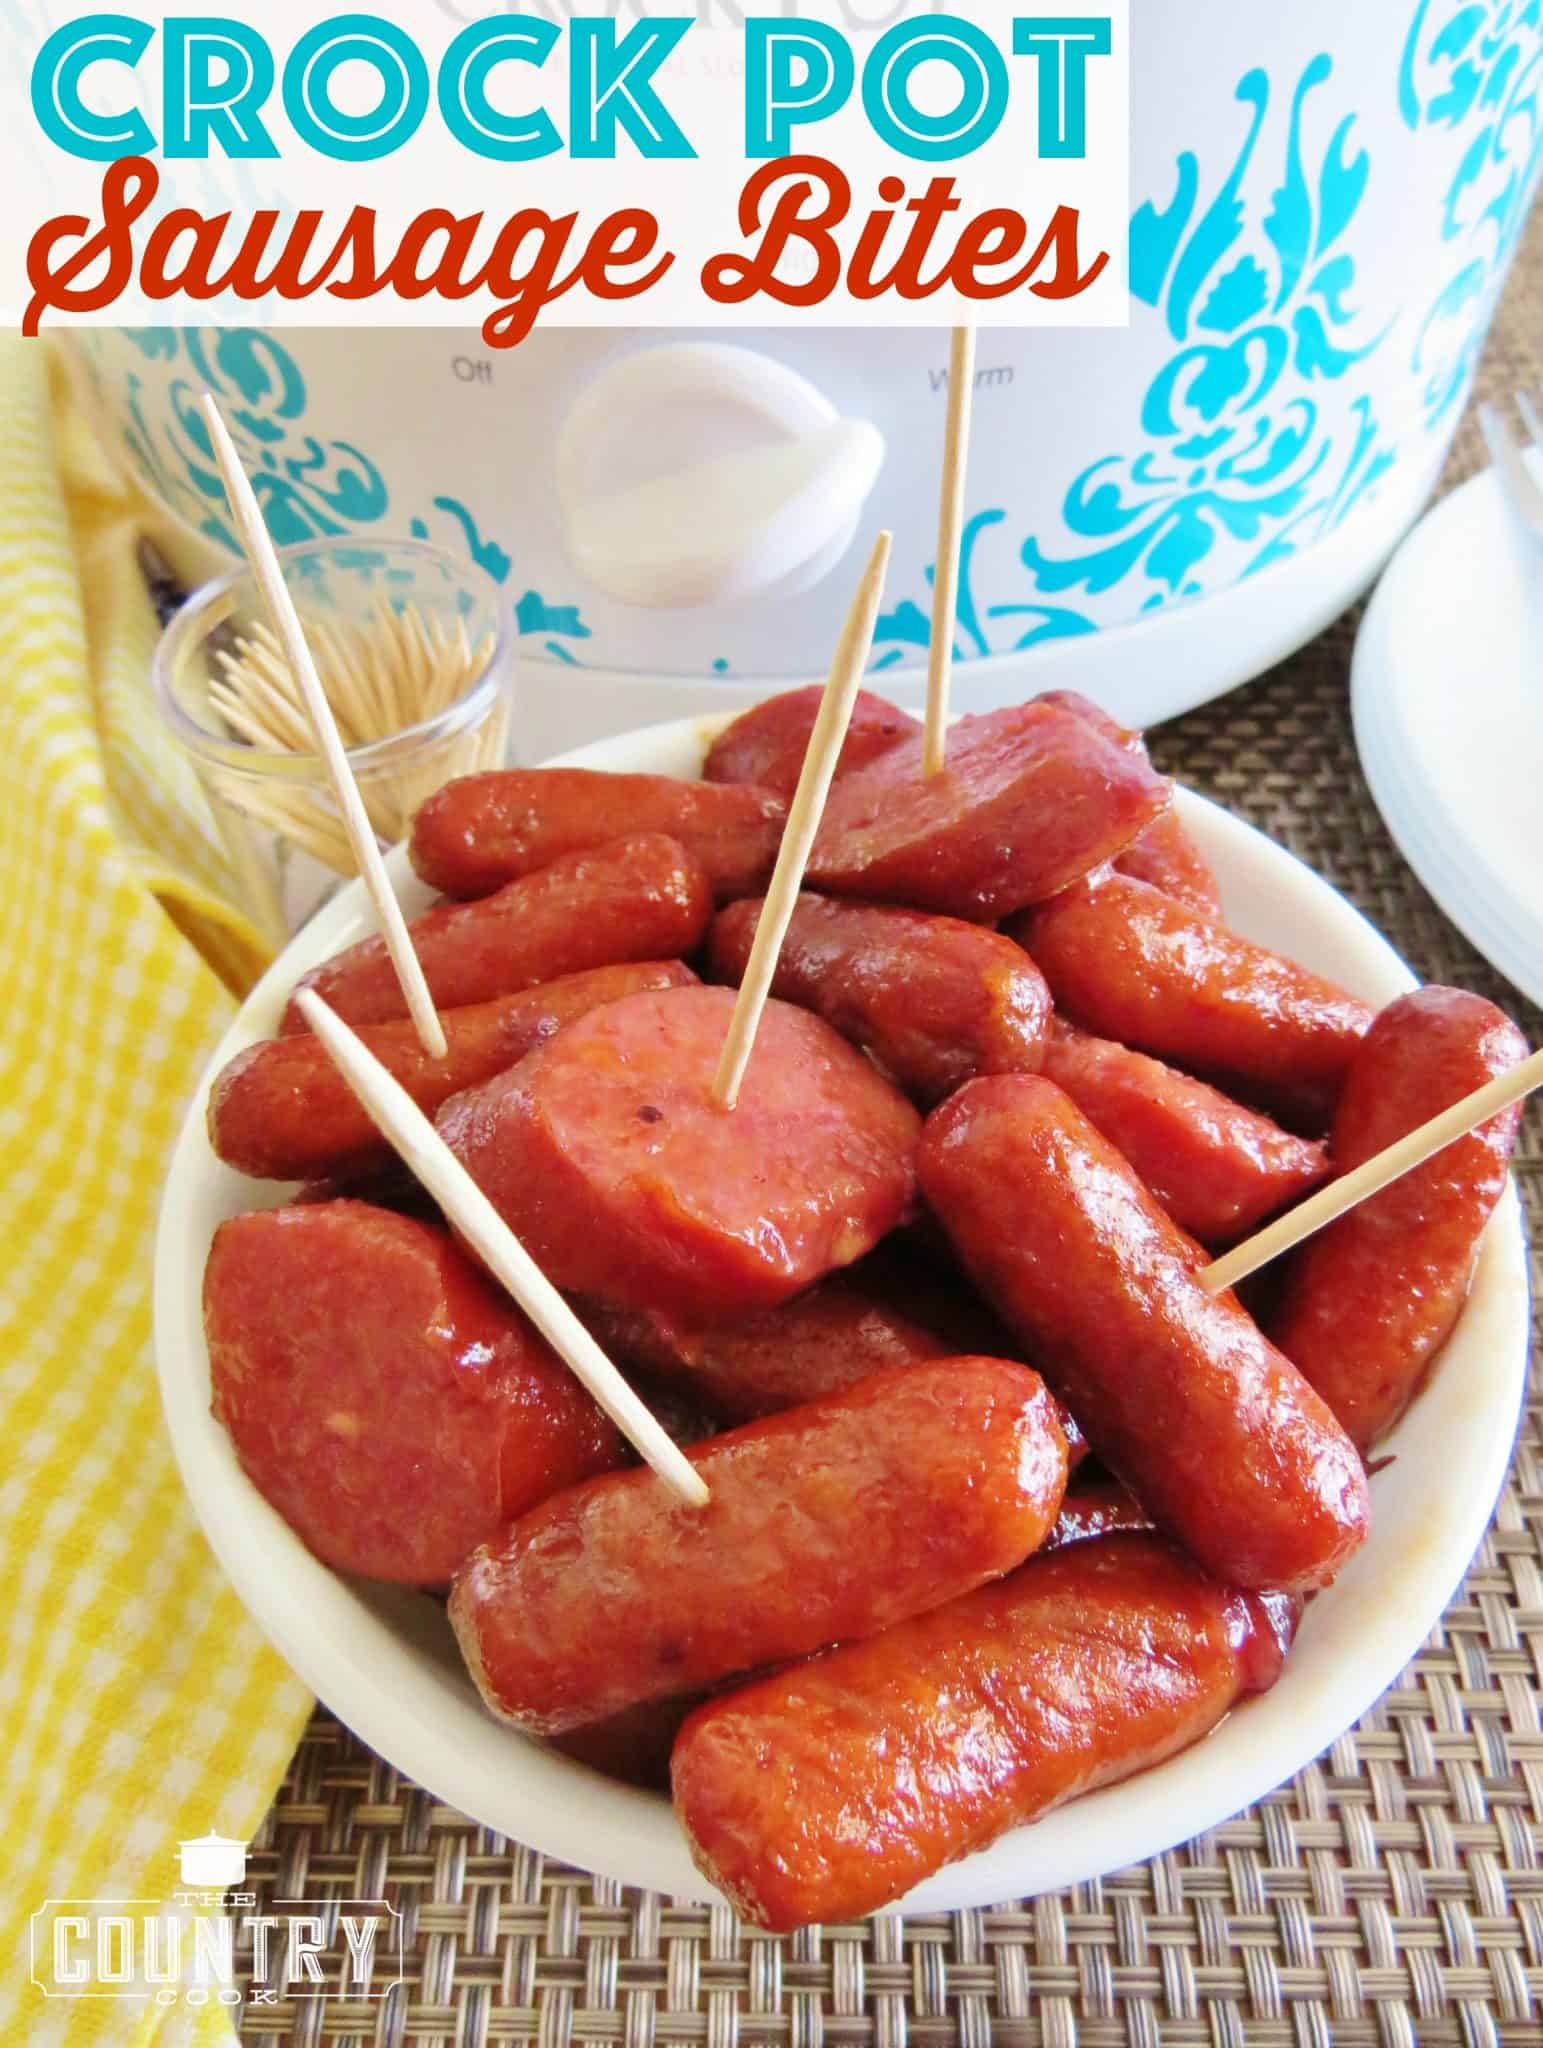 Crock Pot Sausage Bites shown with some toothpicks poked in a few and served in a small white bowl.